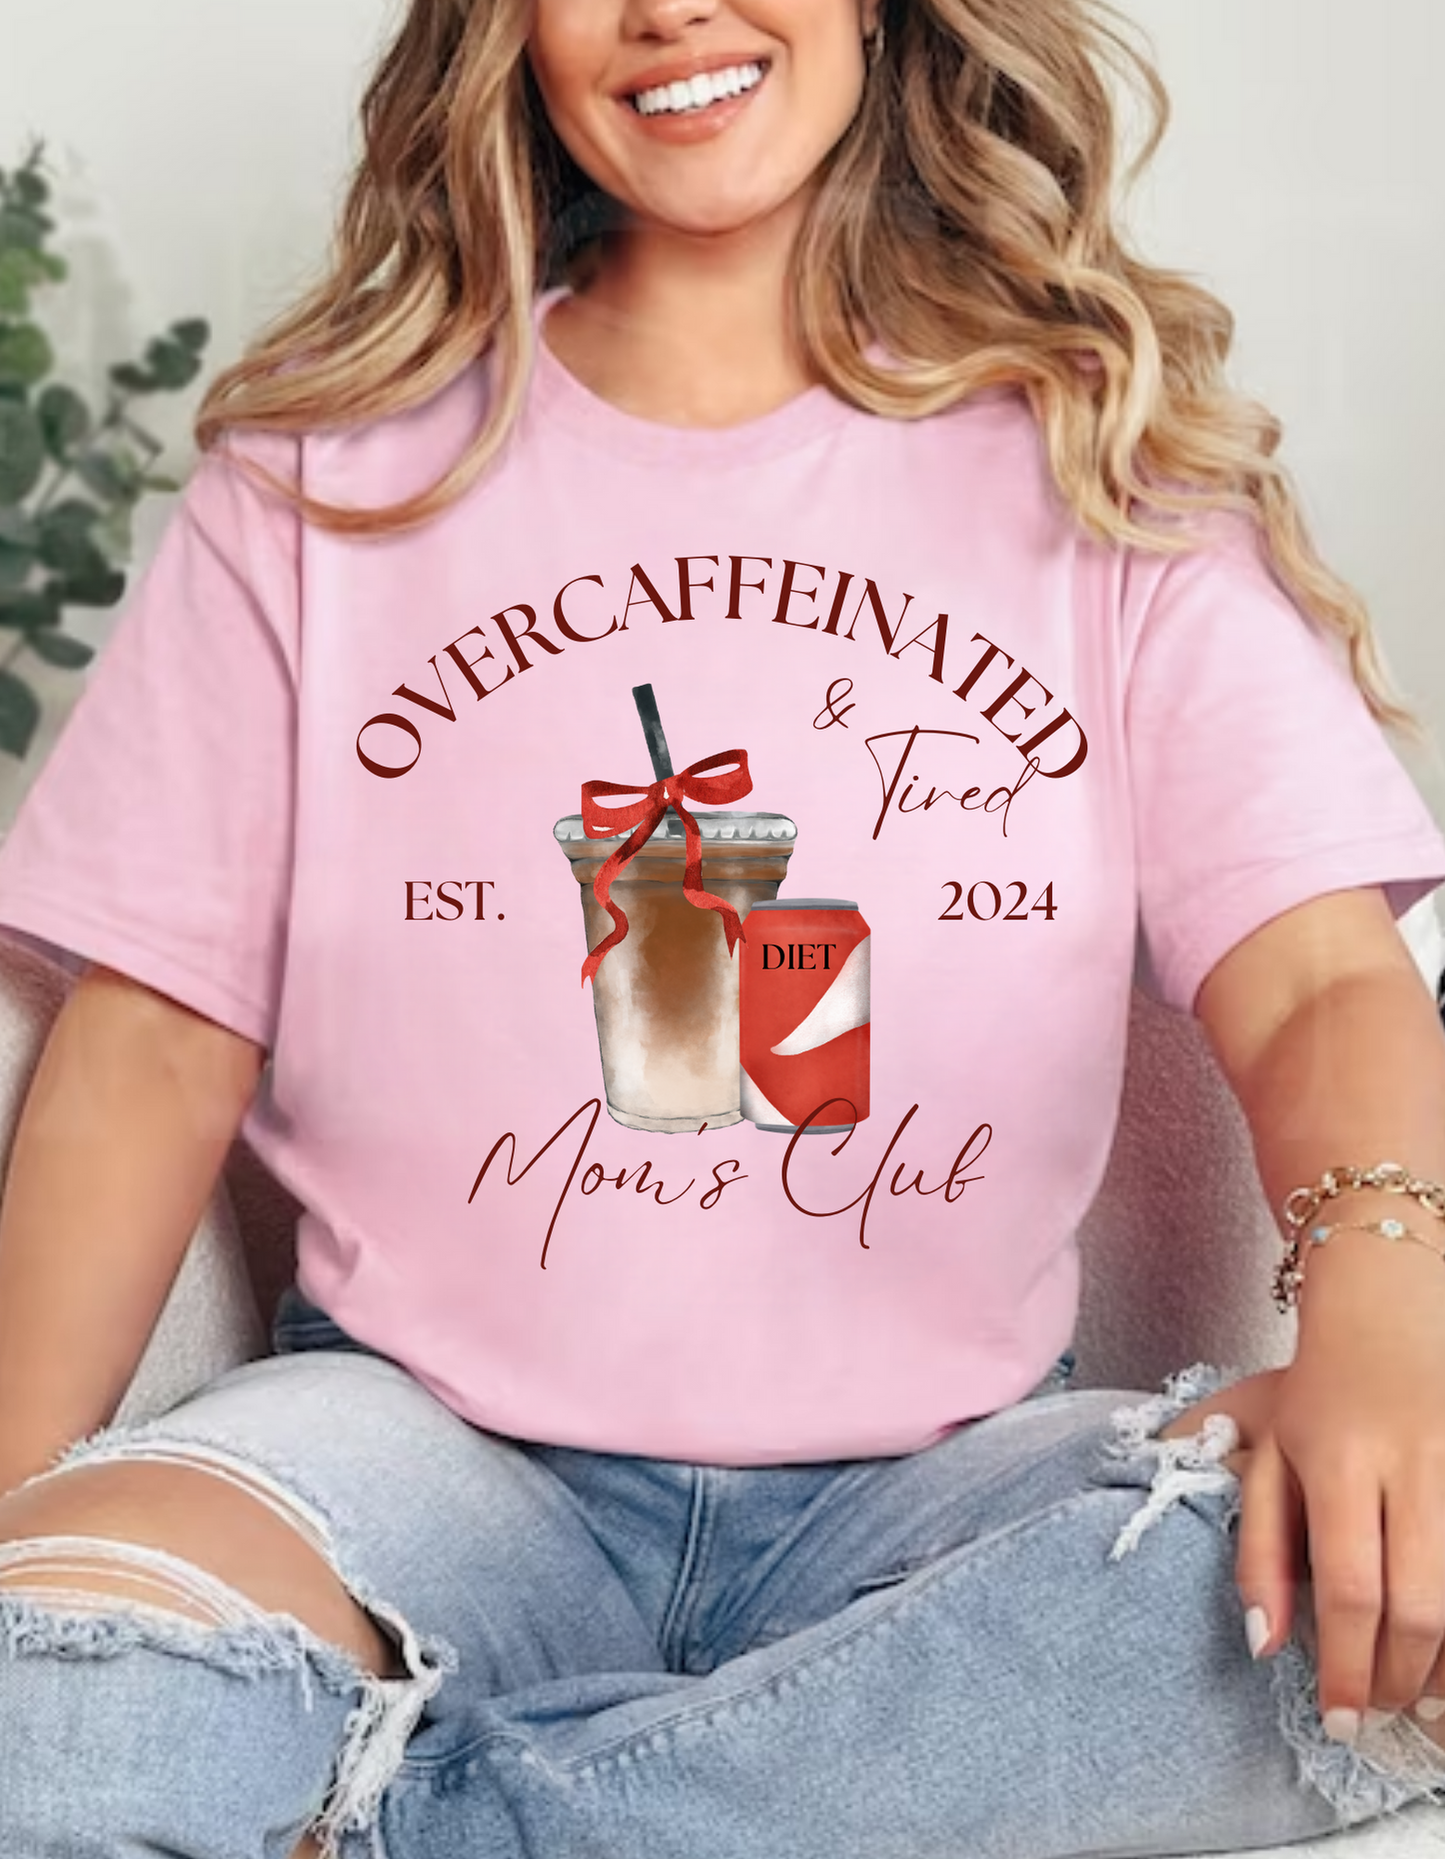 Overcaffeinated and Tired Mom's Club Adult Tees